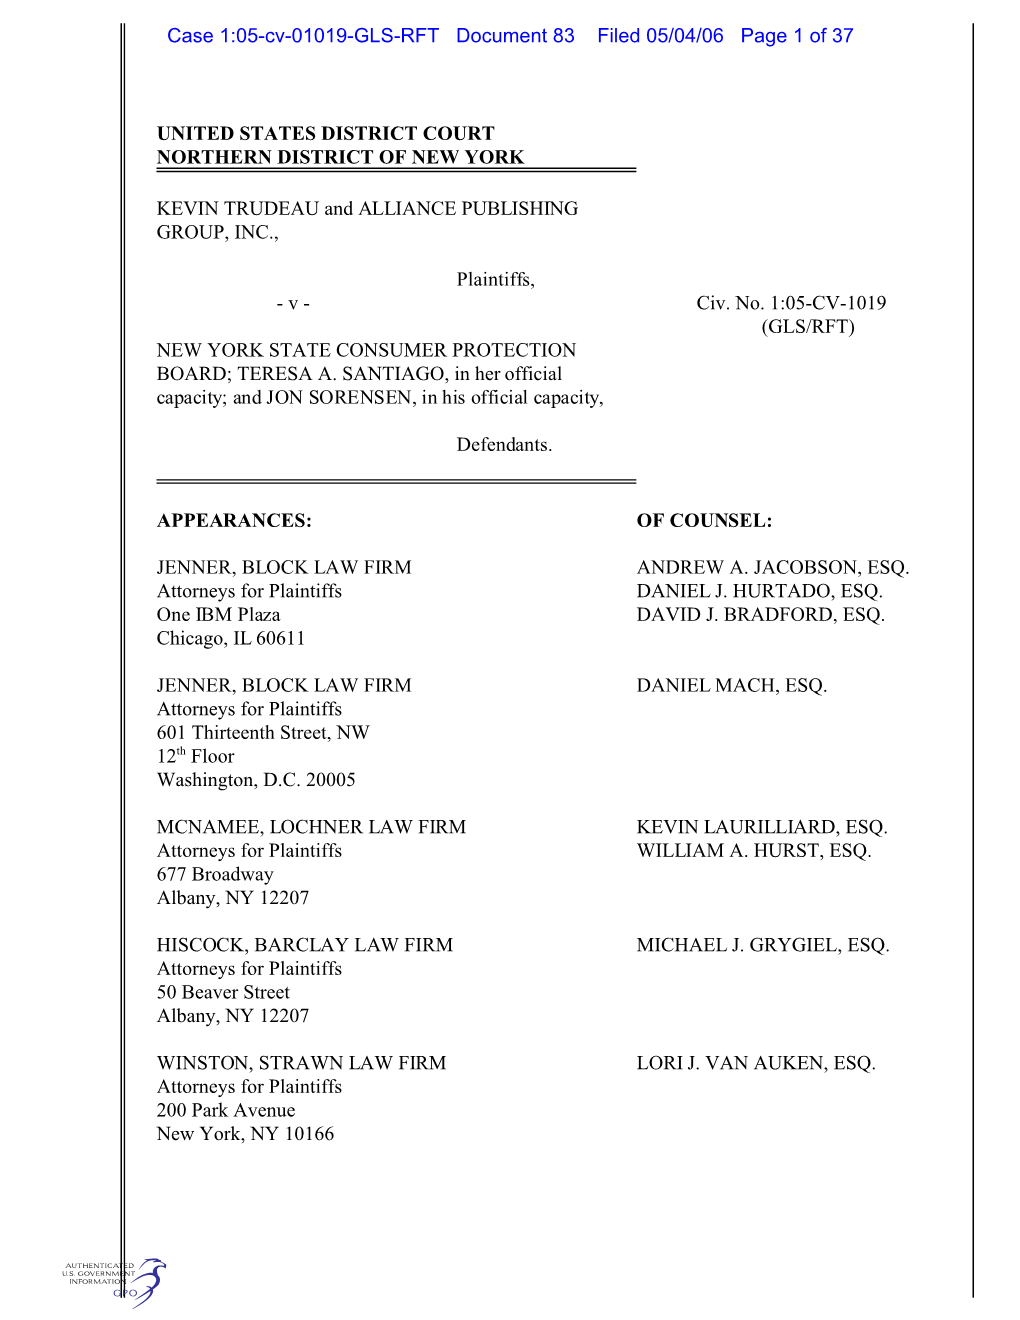 UNITED STATES DISTRICT COURT NORTHERN DISTRICT of NEW YORK KEVIN TRUDEAU and ALLIANCE PUBLISHING GROUP, INC., Plaintiffs